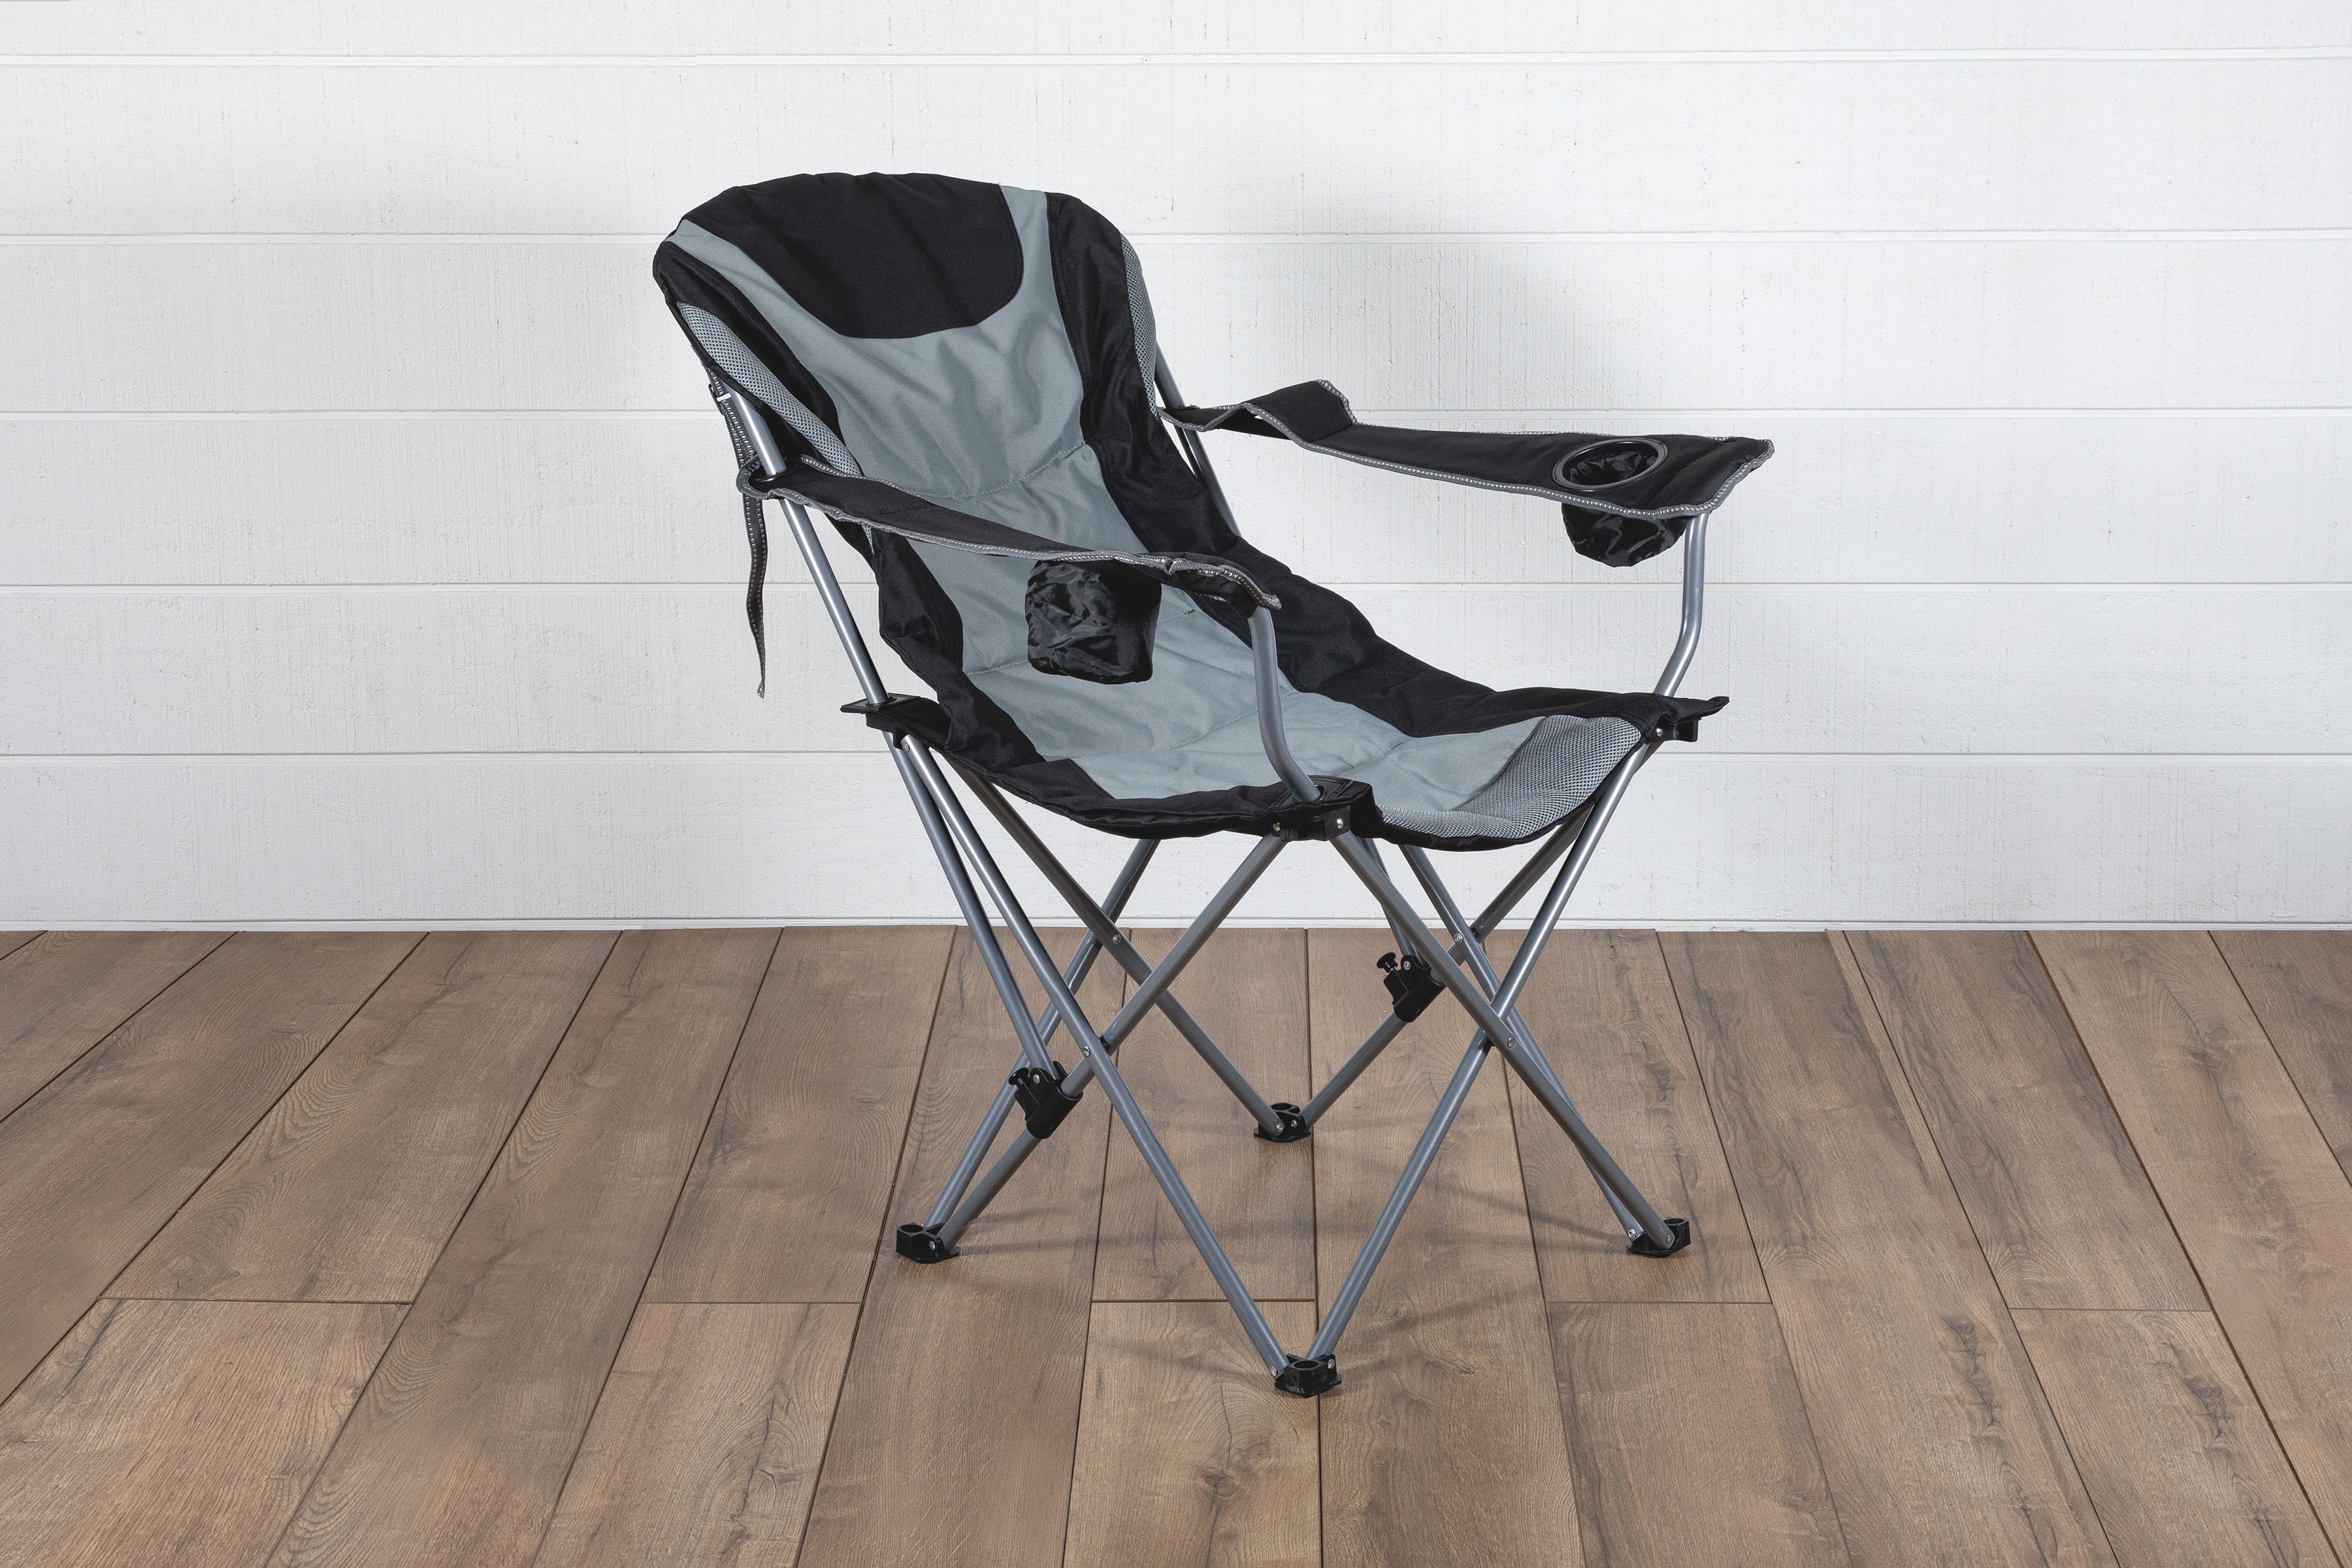 Miami Dolphins - Reclining Camp Chair